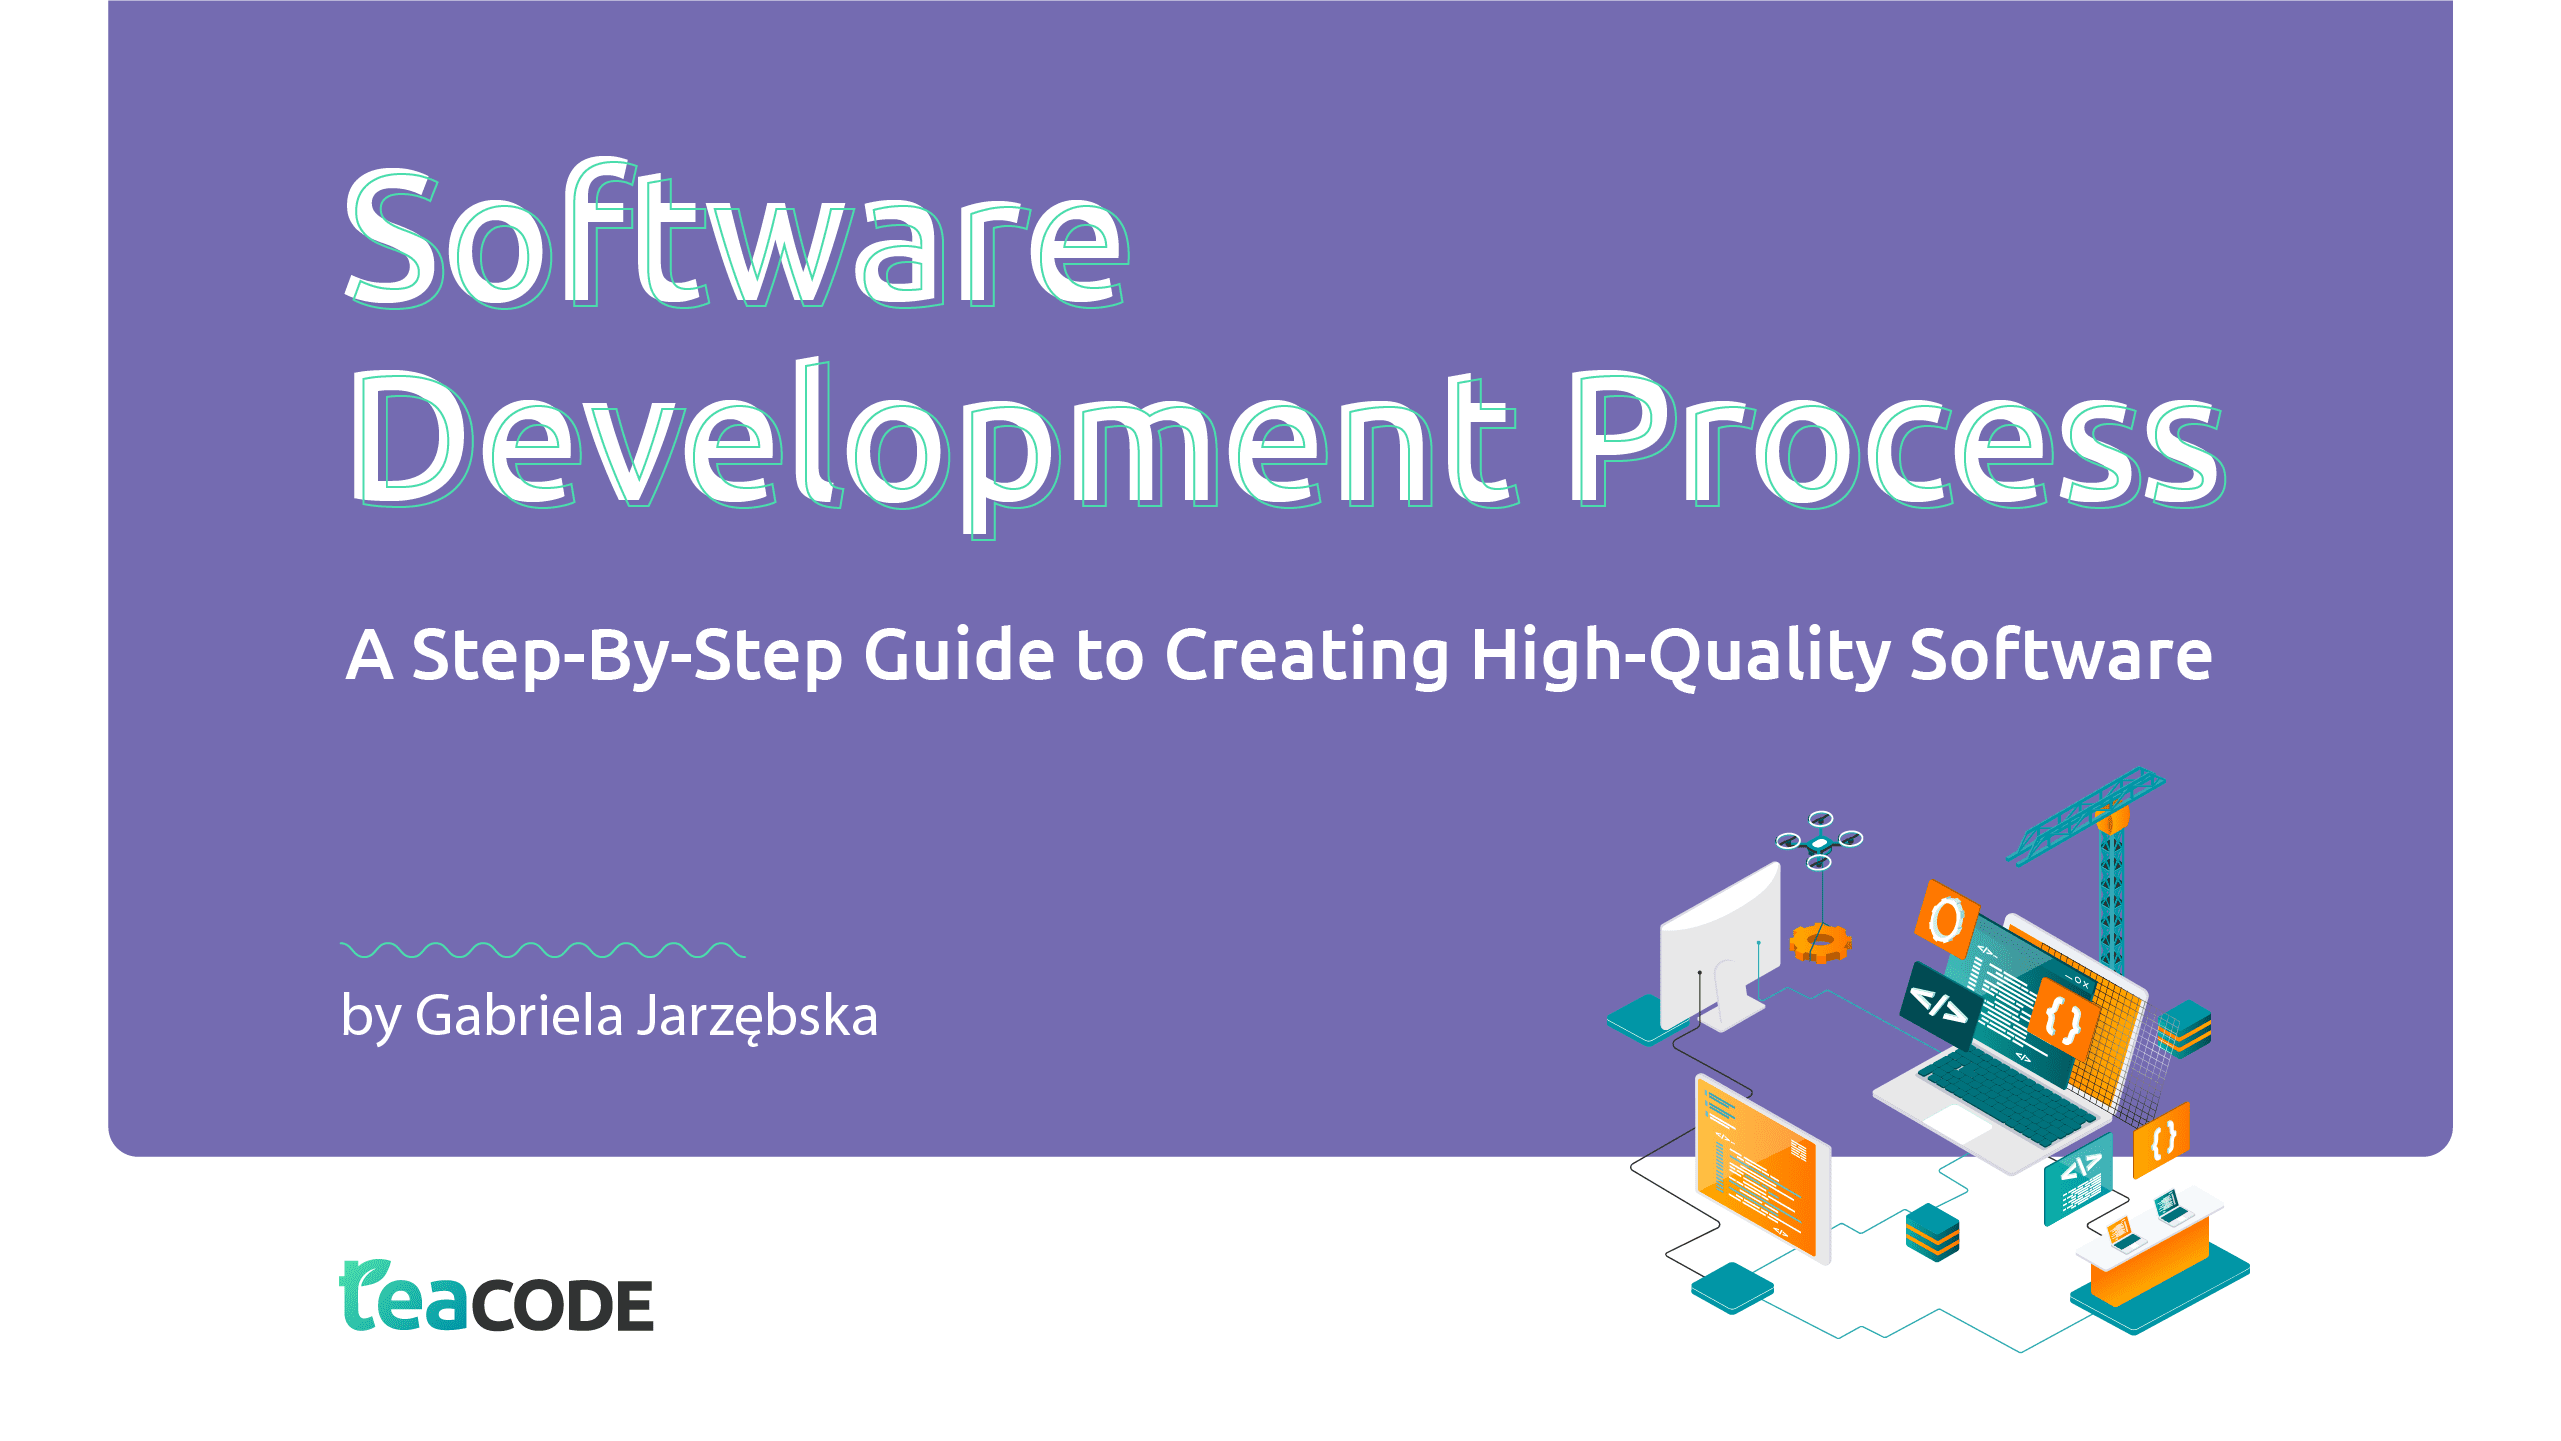 Software Development Process – A Step-By-Step Guide to Creating High-Quality Software